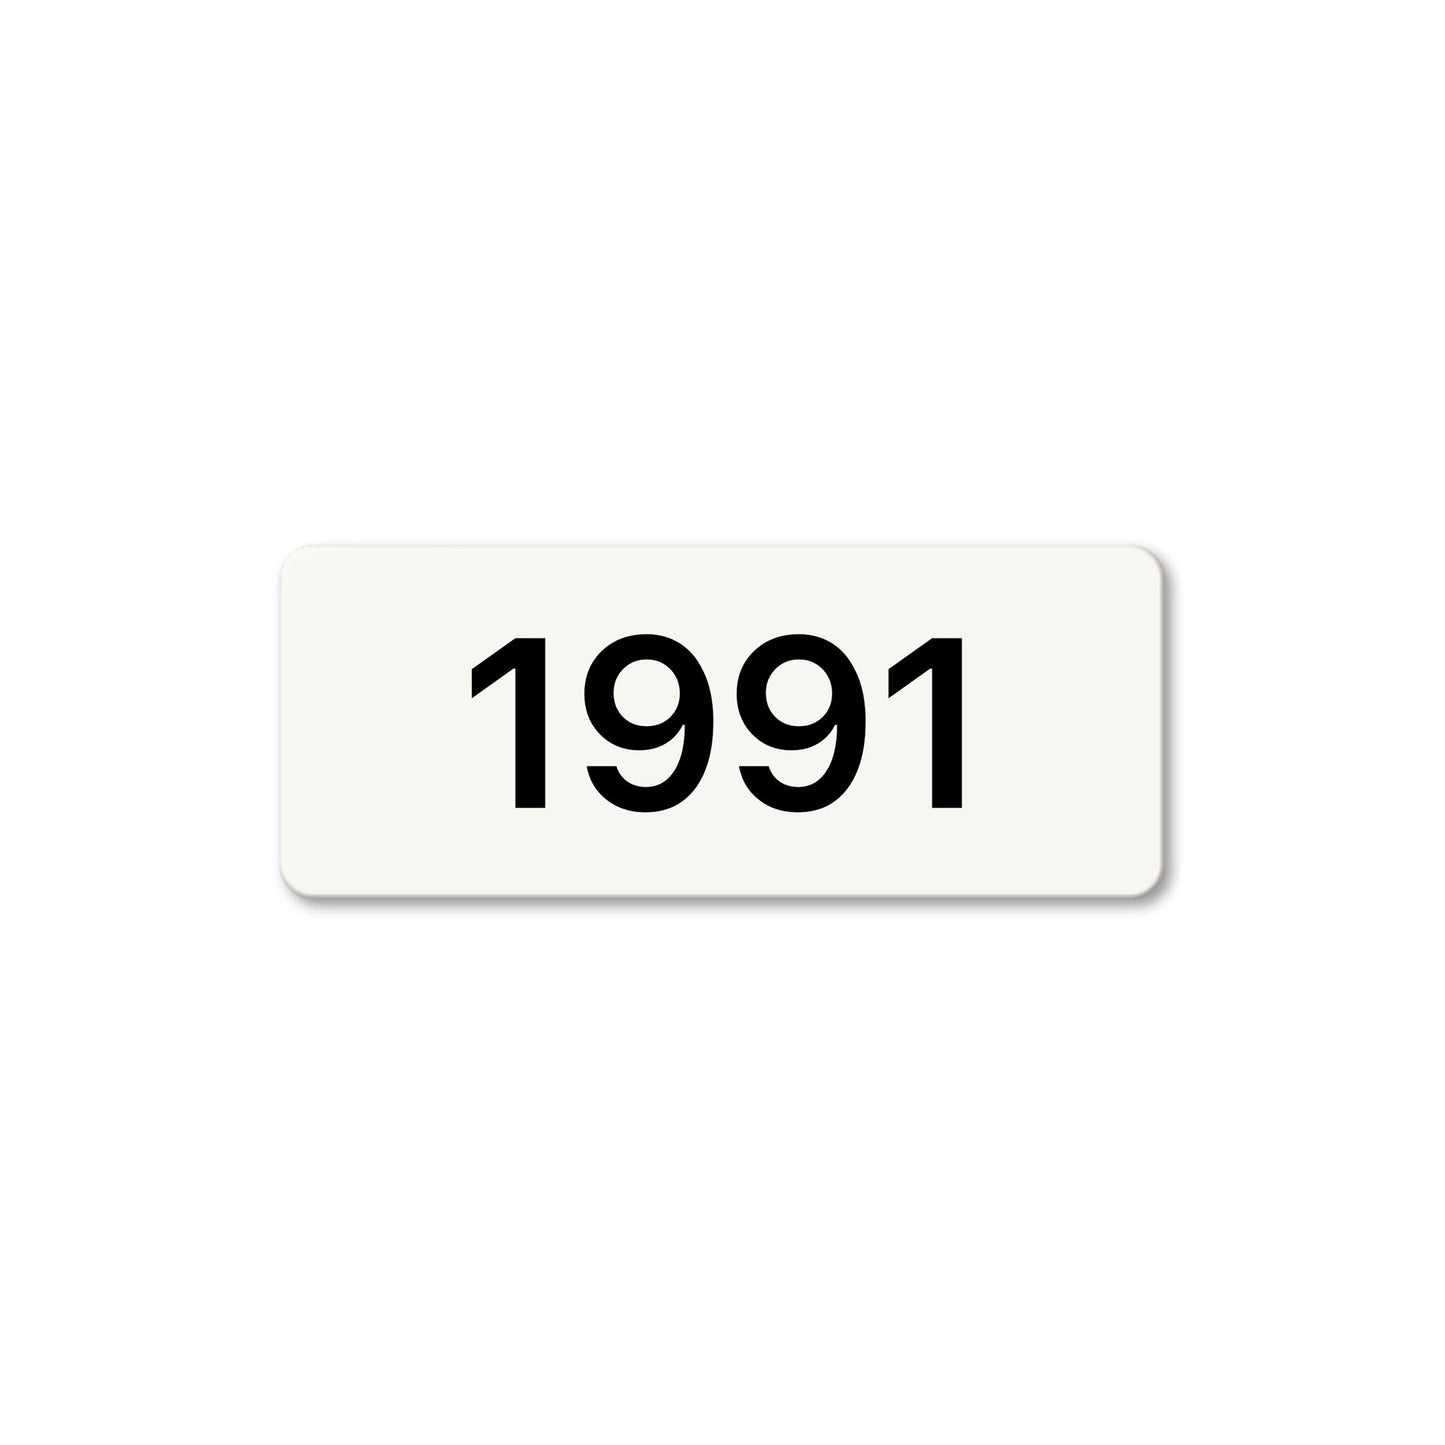 Numeral 1991